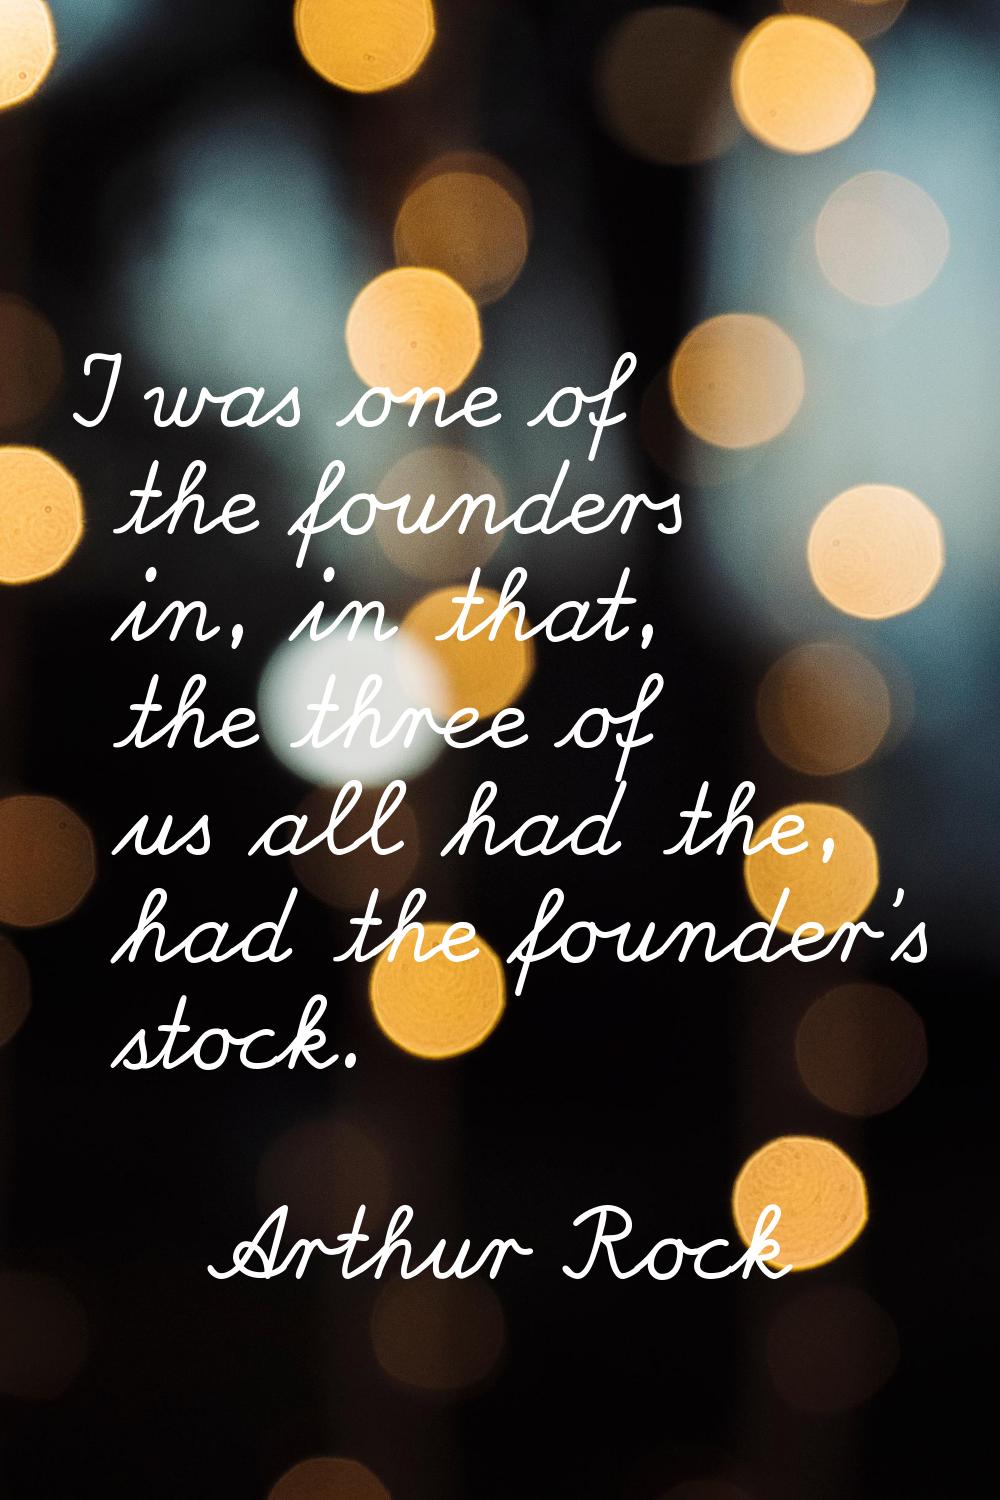 I was one of the founders in, in that, the three of us all had the, had the founder's stock.